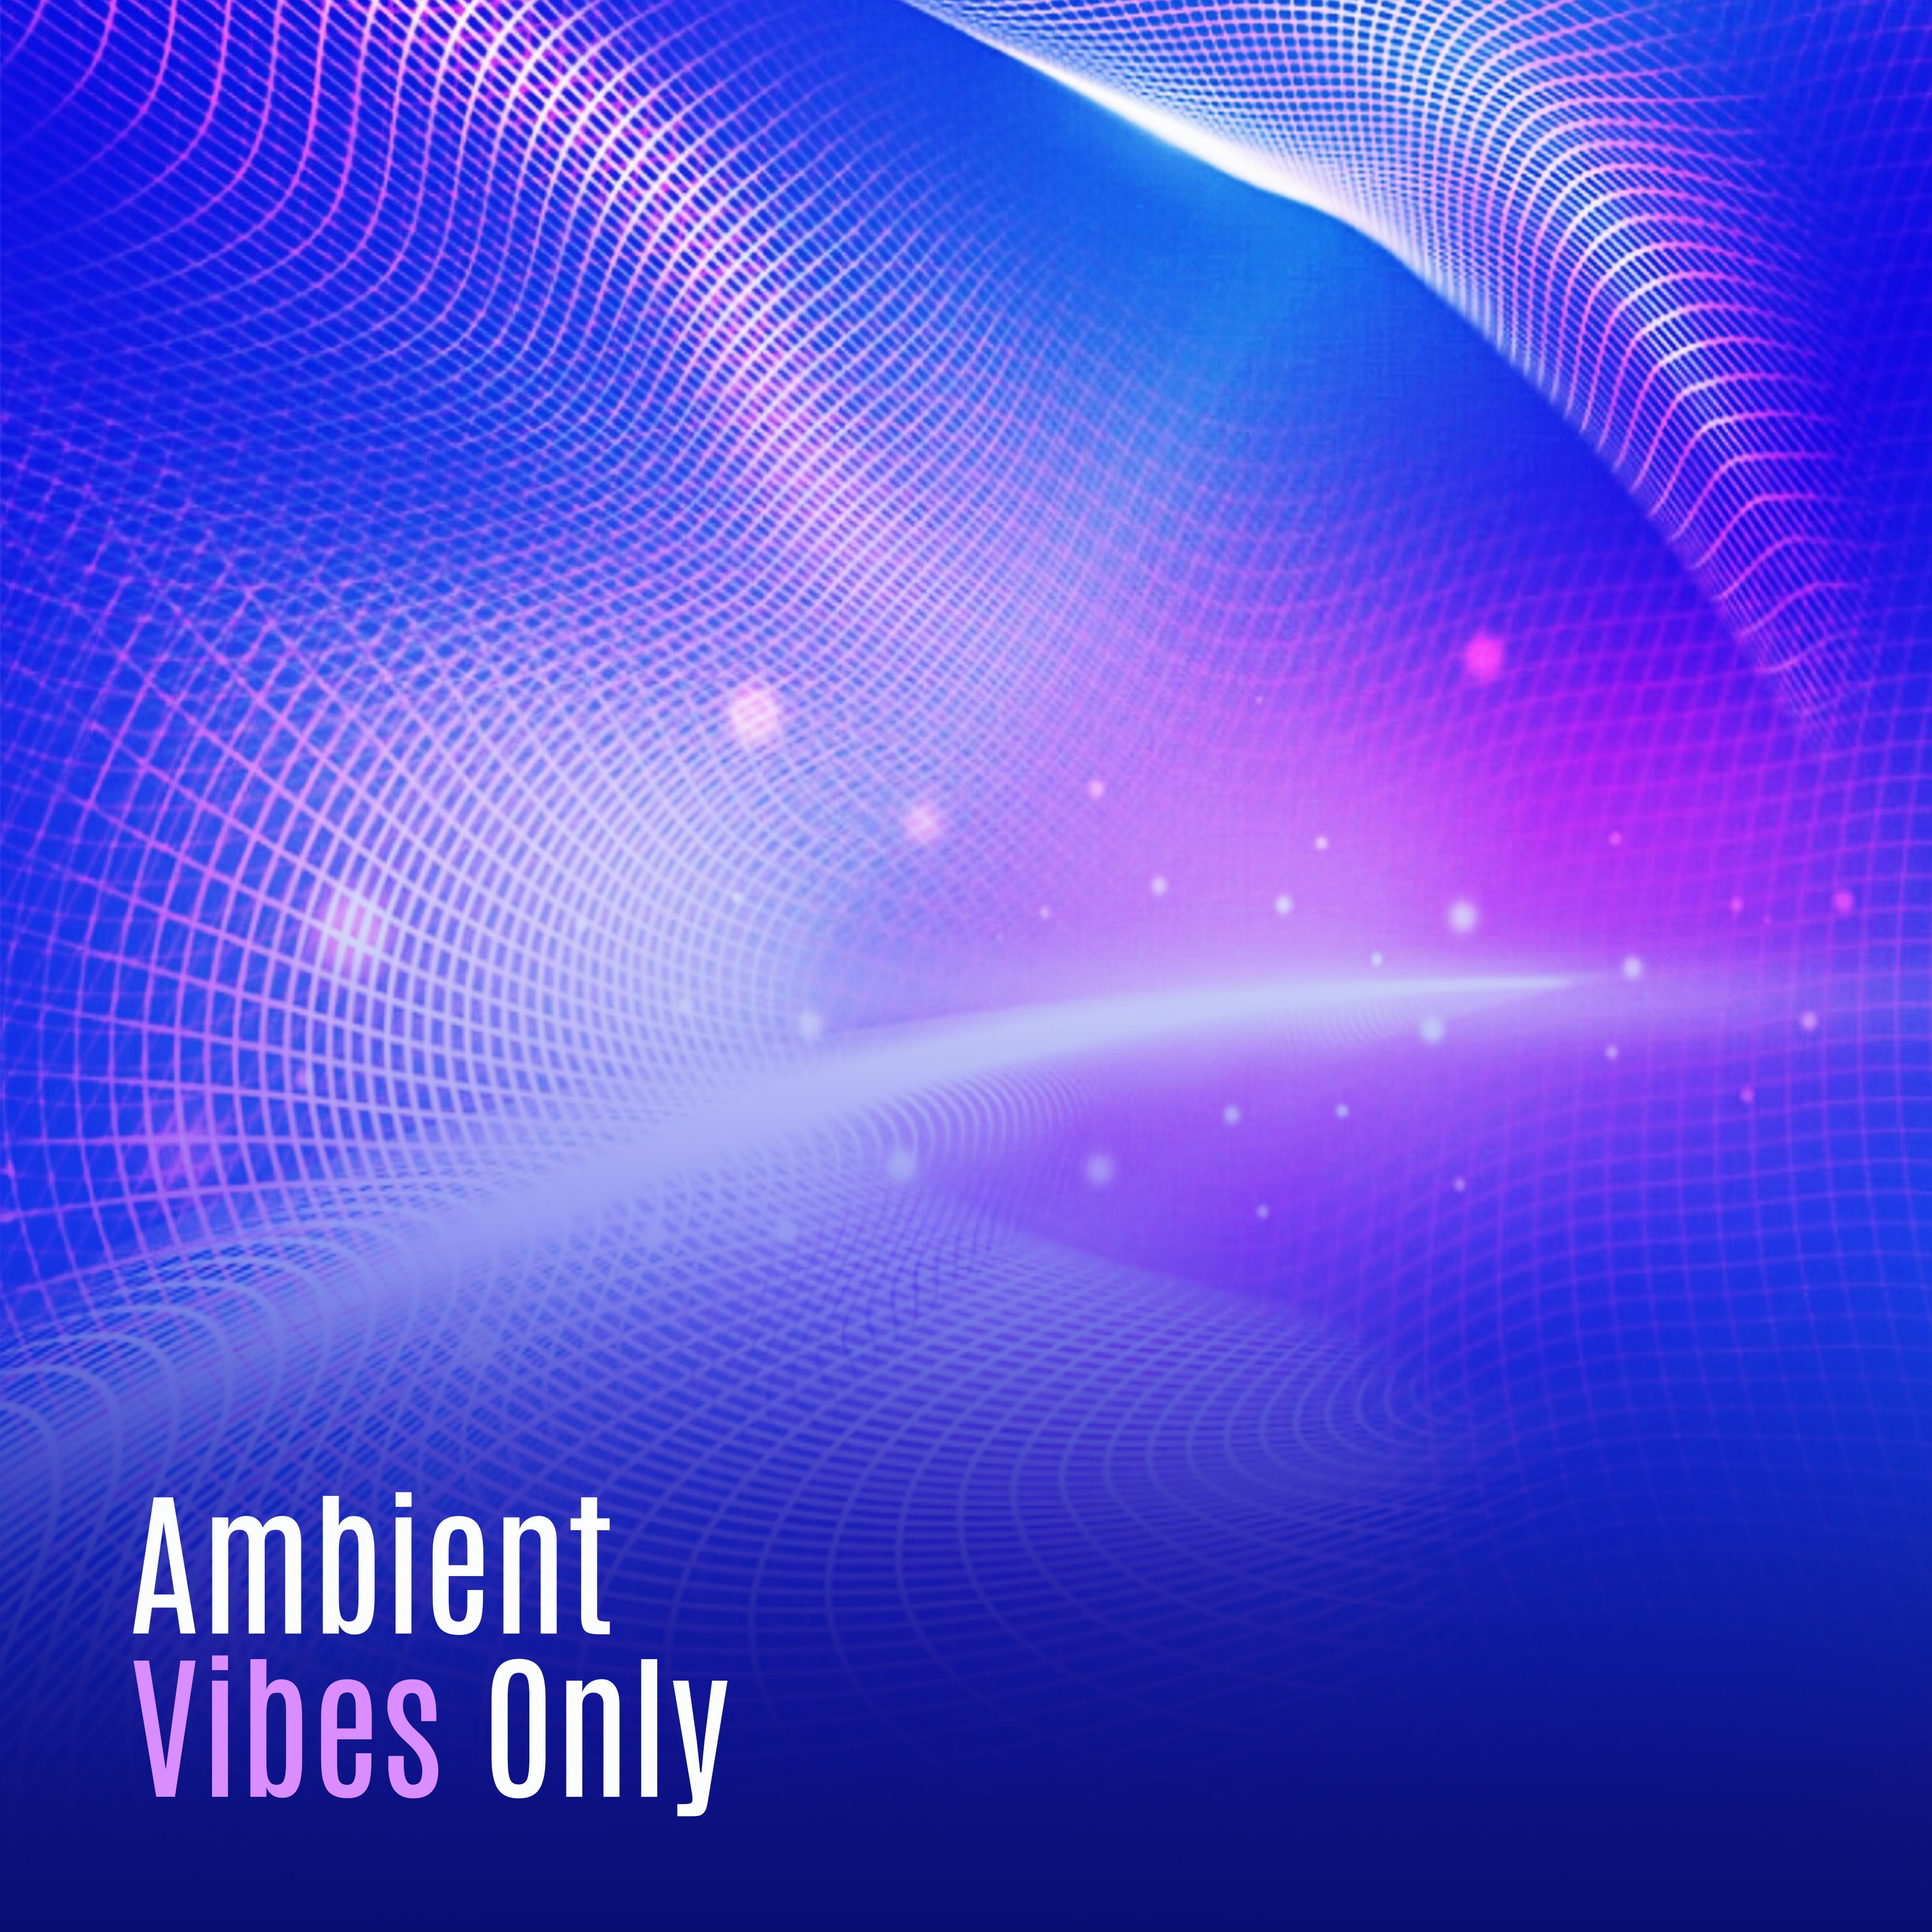 Ambient Vibes Only  New Chillout Music, Eletronic Beats, Trance, Downbeats Lounge, Summer 2017